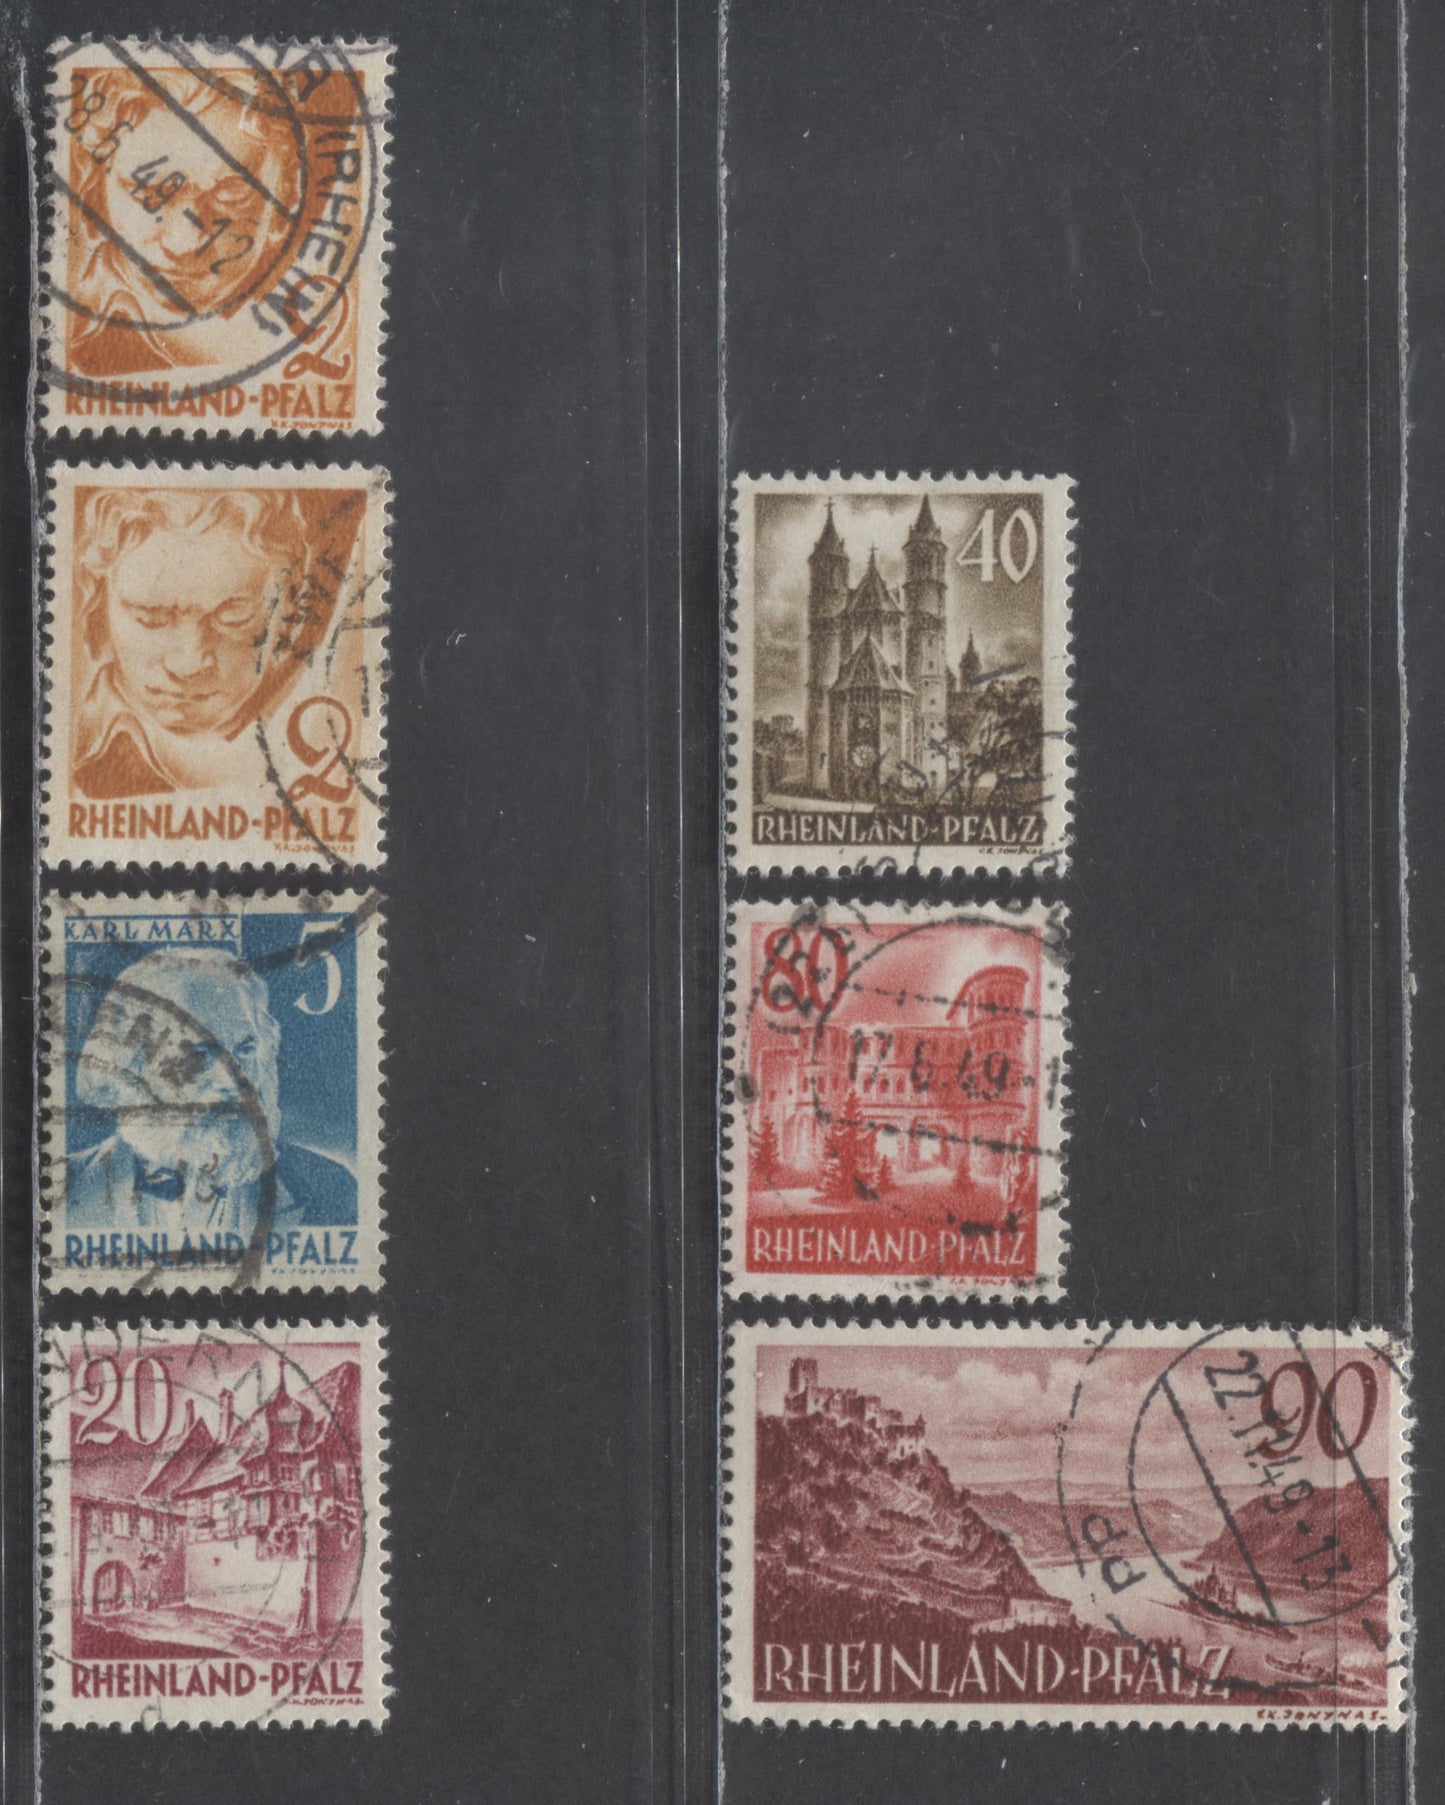 Lot 90 Germany SC#6N30/6N38 1948-1949 Definitives, Without PF + Extra Shade Of The 2pf, 7 Fine/Very Fine Used Singles, Click on Listing to See ALL Pictures, 2017 Scott Cat. $25.3 USD